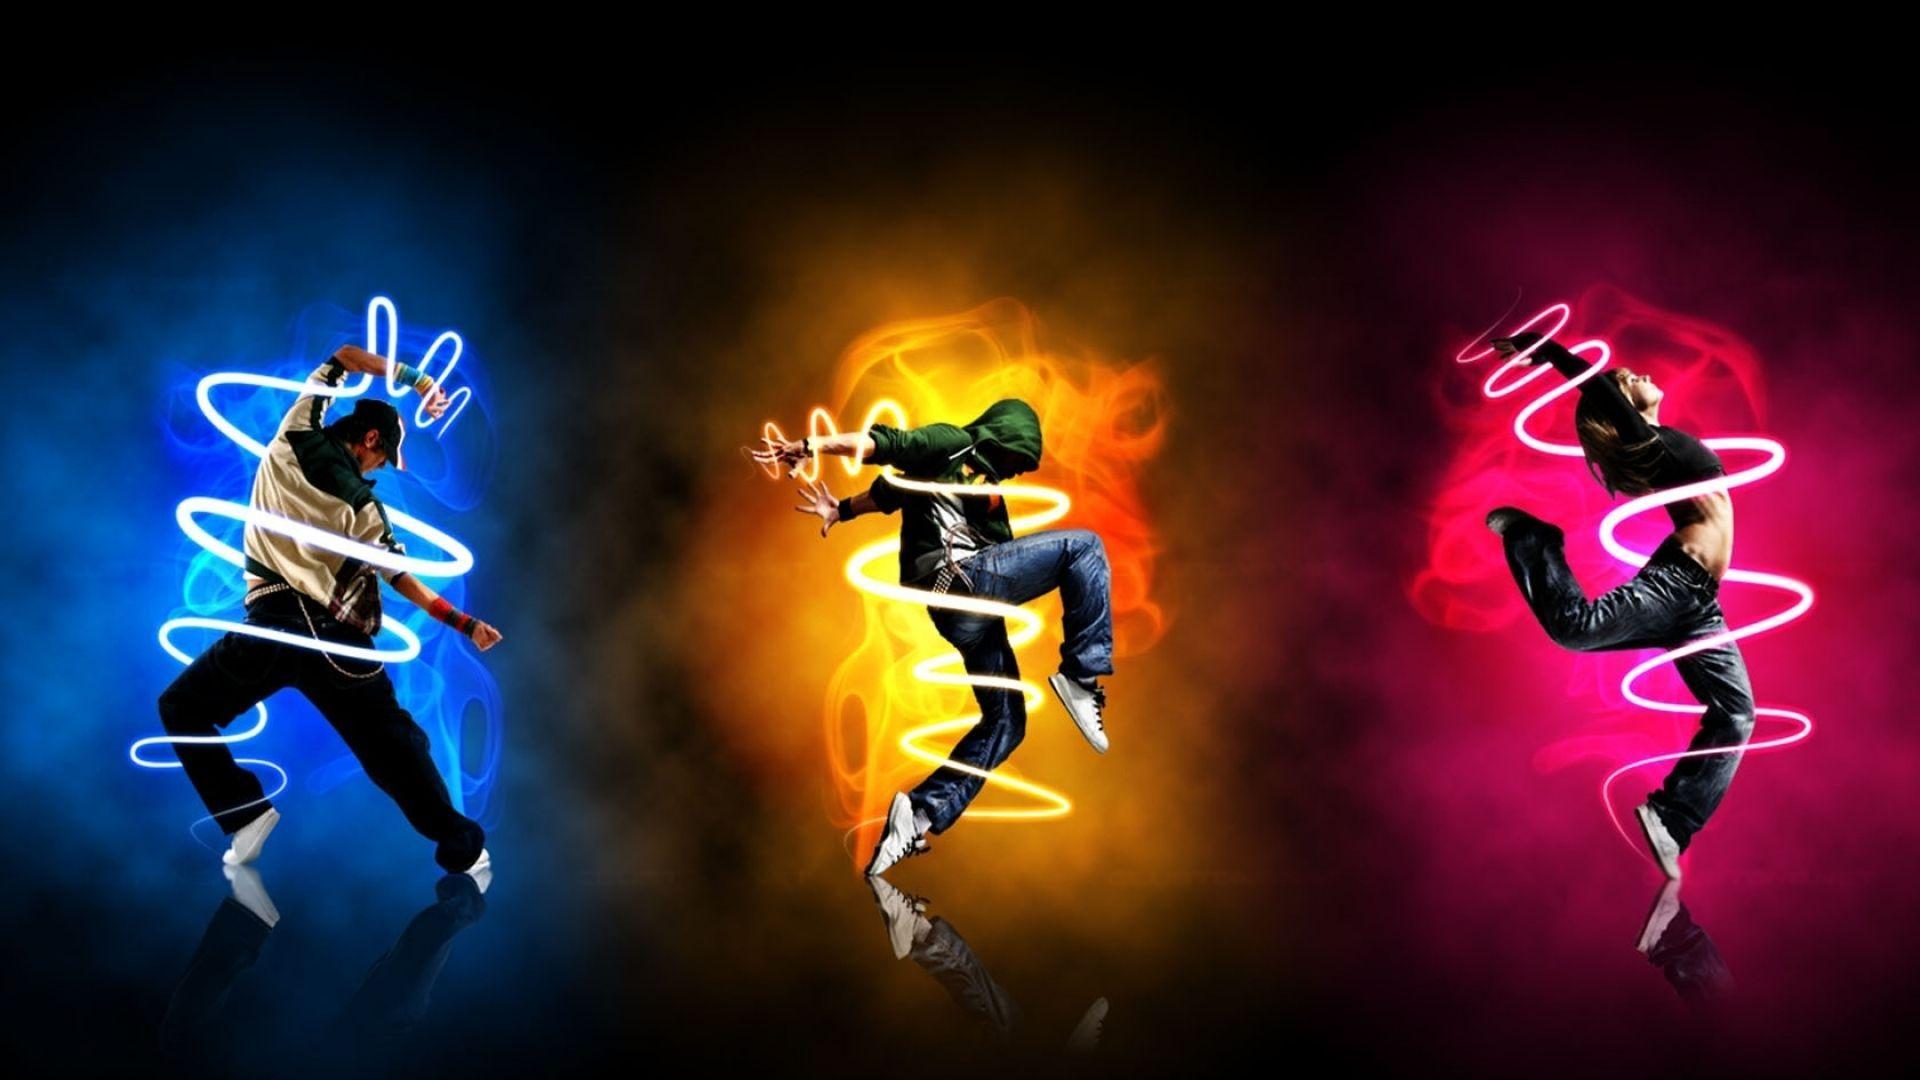 Society Recruit New Dance Naxin Background Dancing Poster Creative  Background Image for Free Download